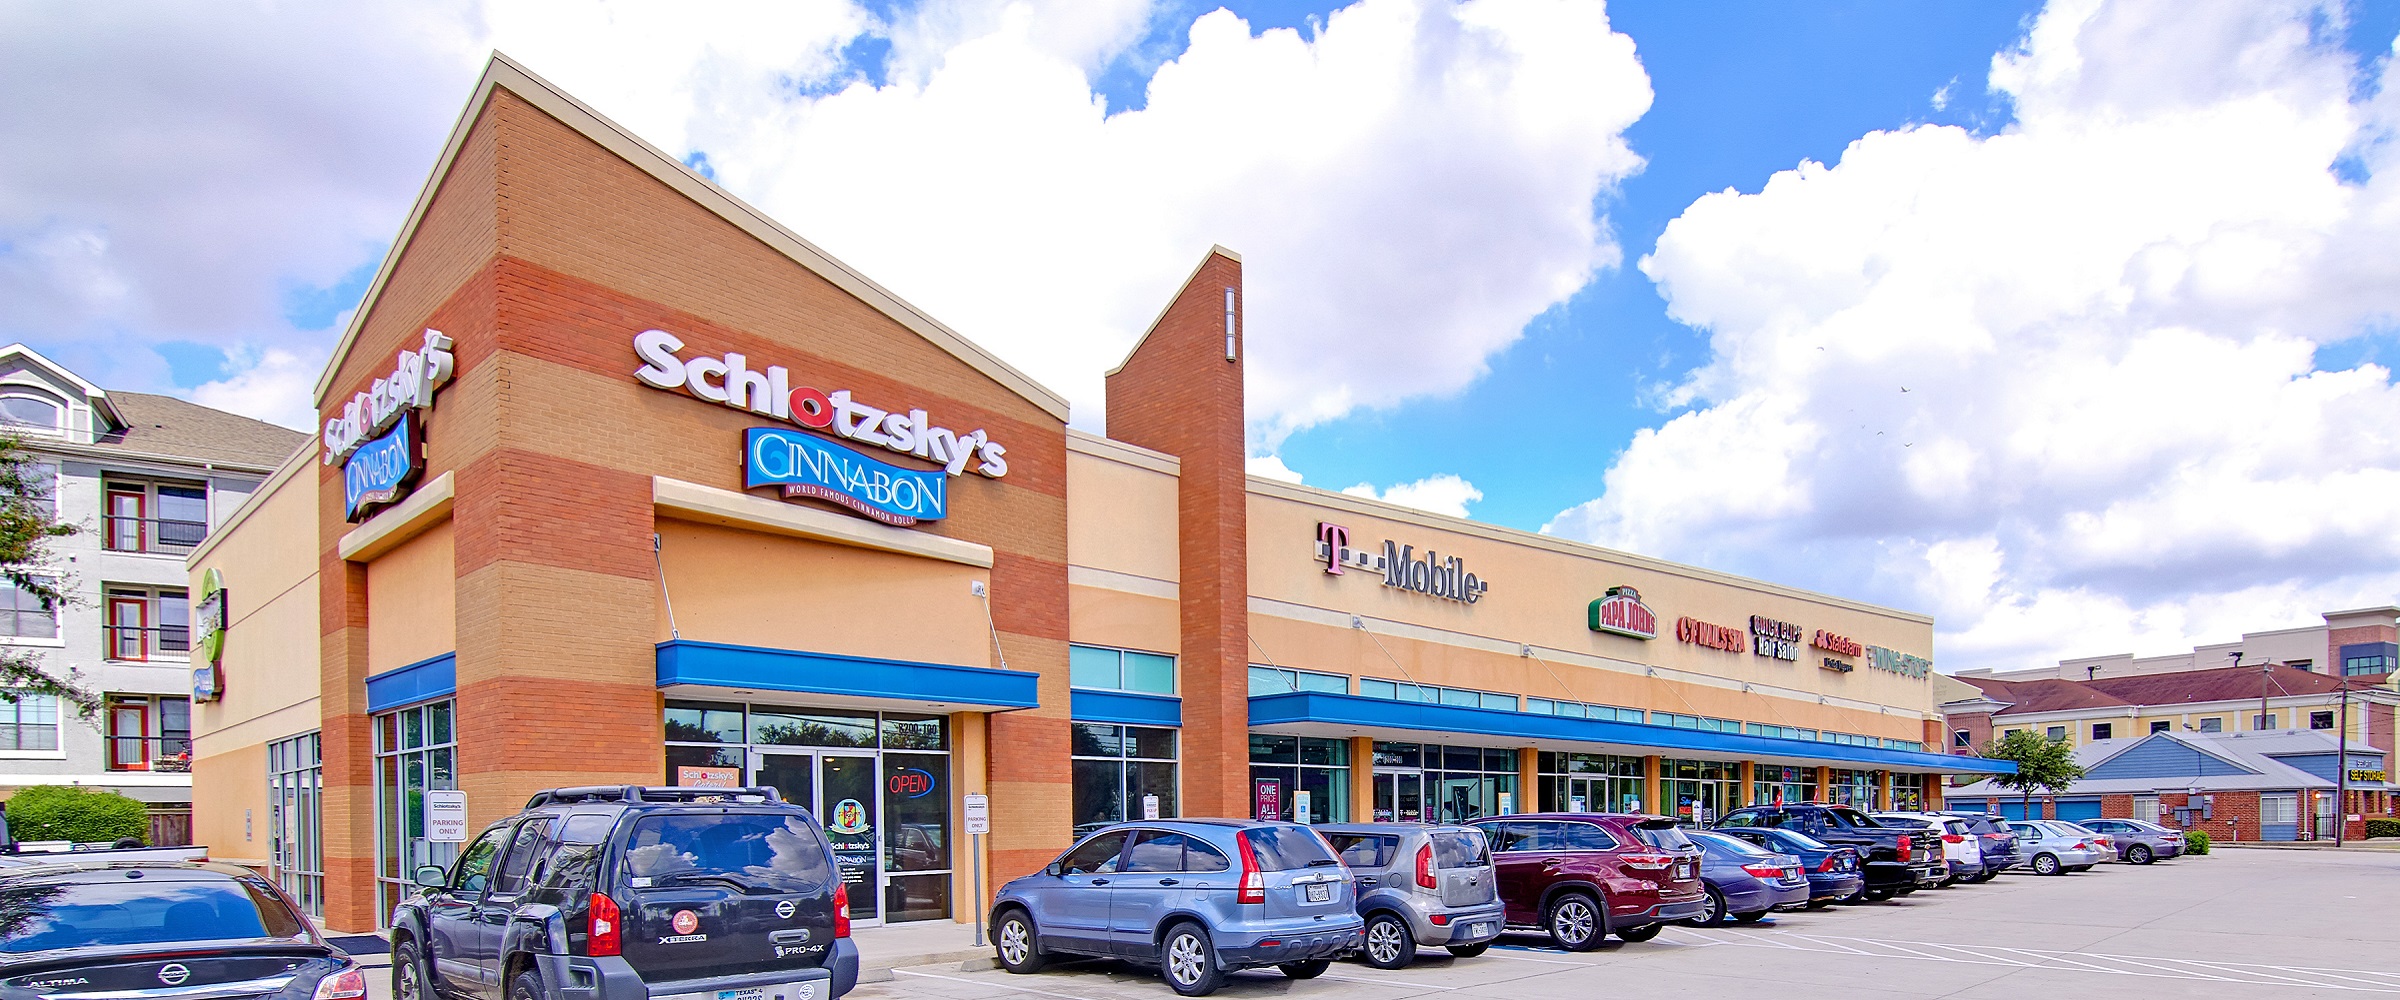 US Property Trust - South Main Shopping Center